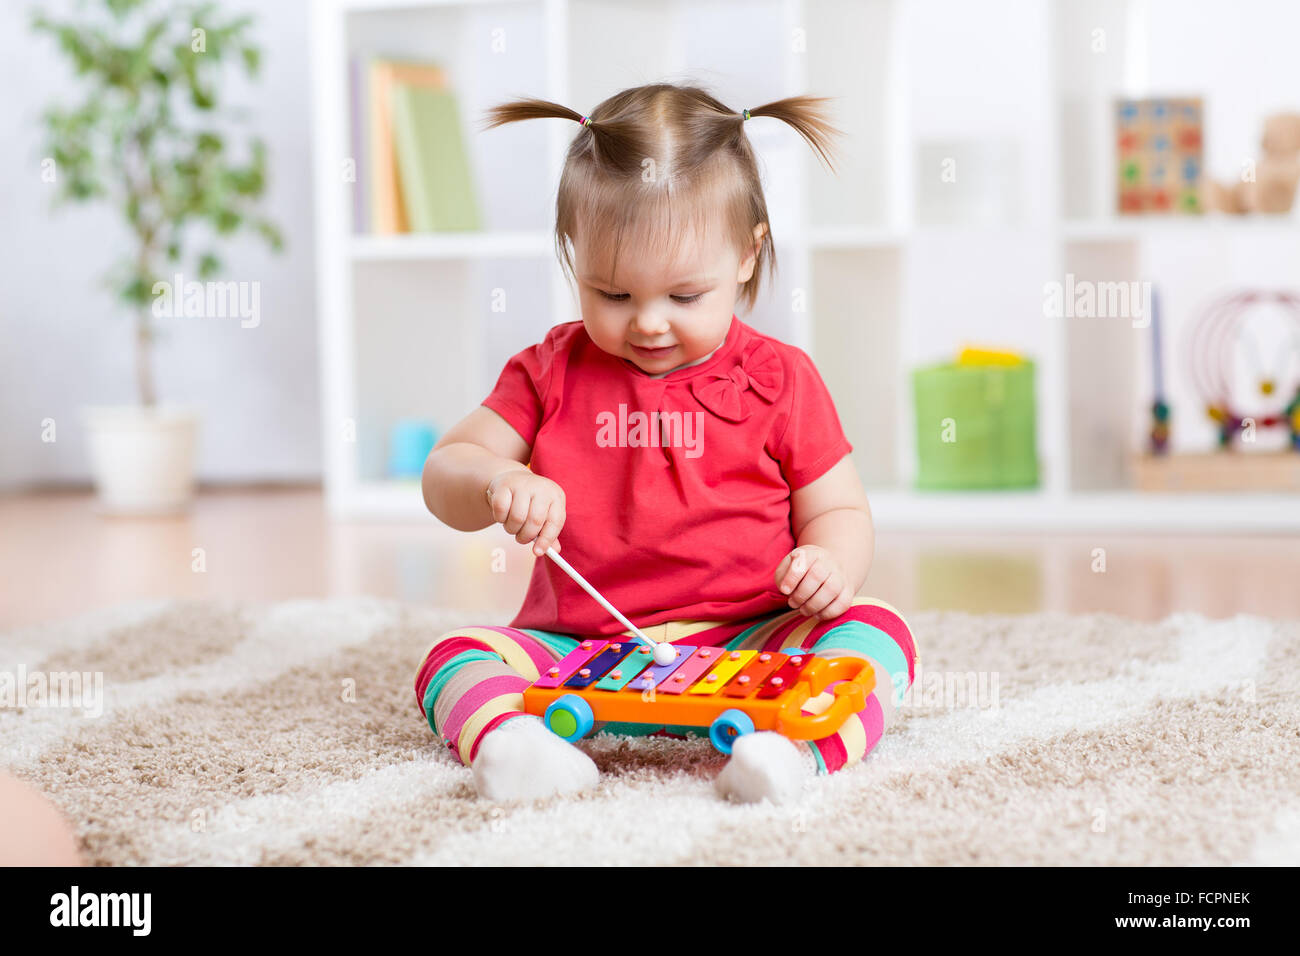 Child little girl plays a musical instrument xylophone Stock Photo